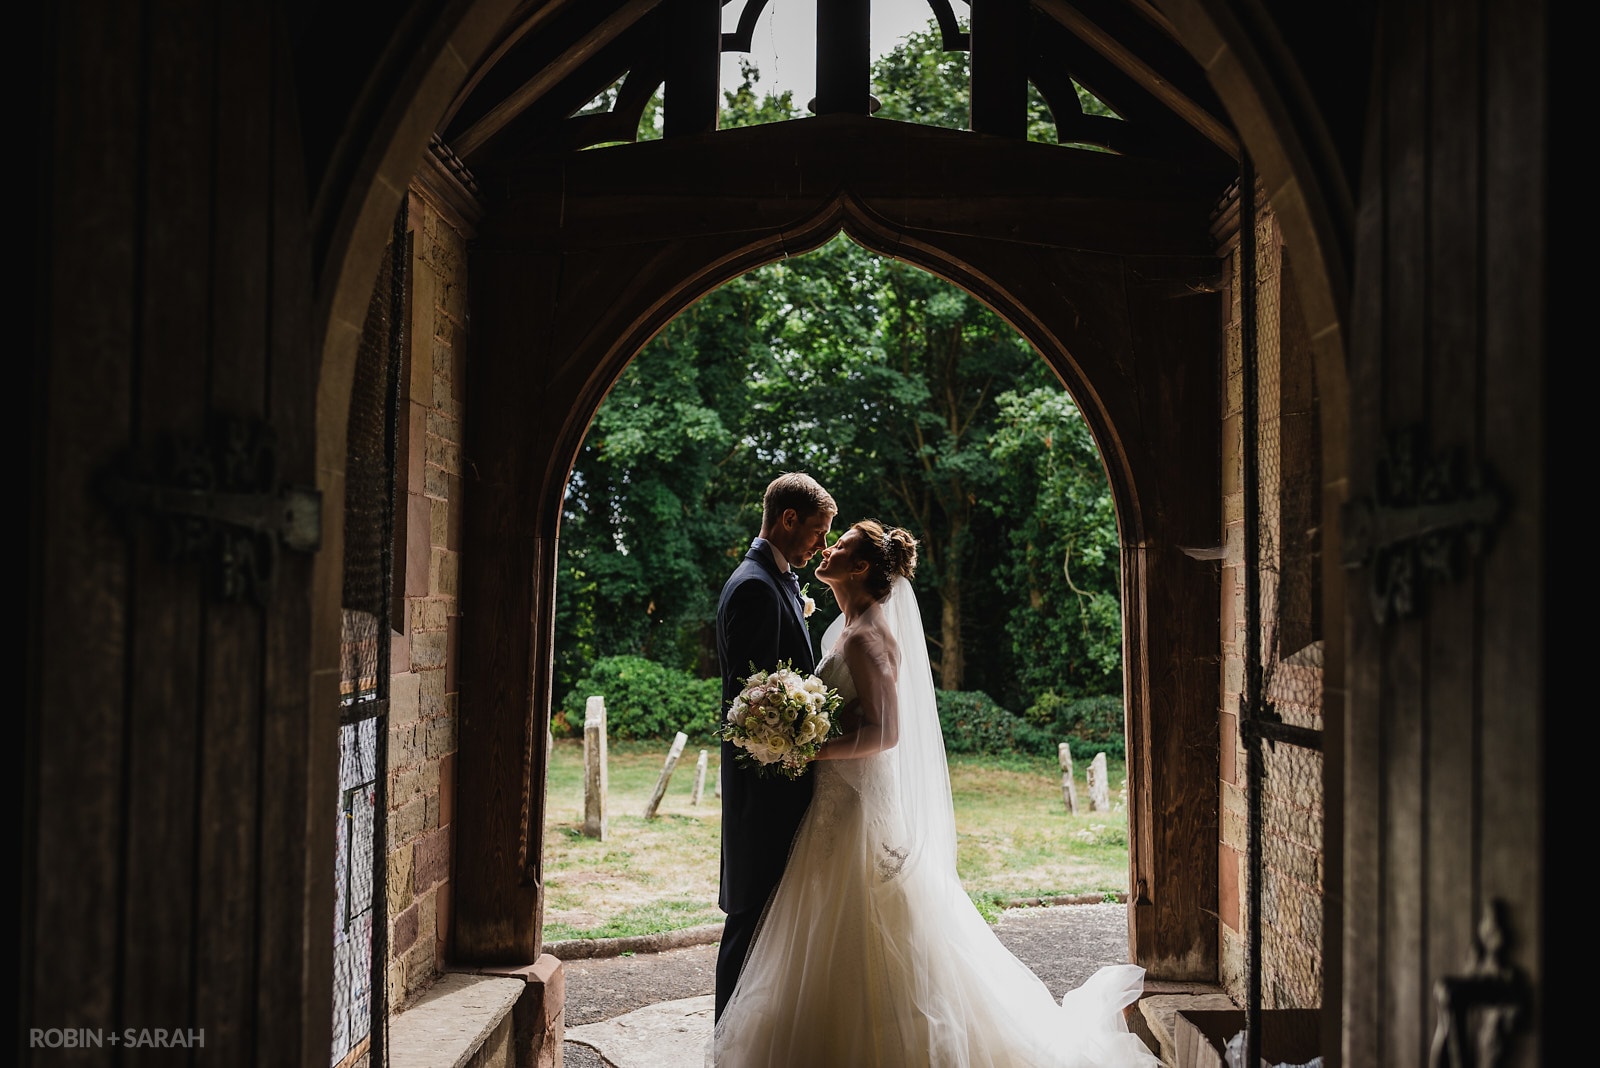 Bride and groom about to kiss under arched doorway at St Peter's Church Diddlebury